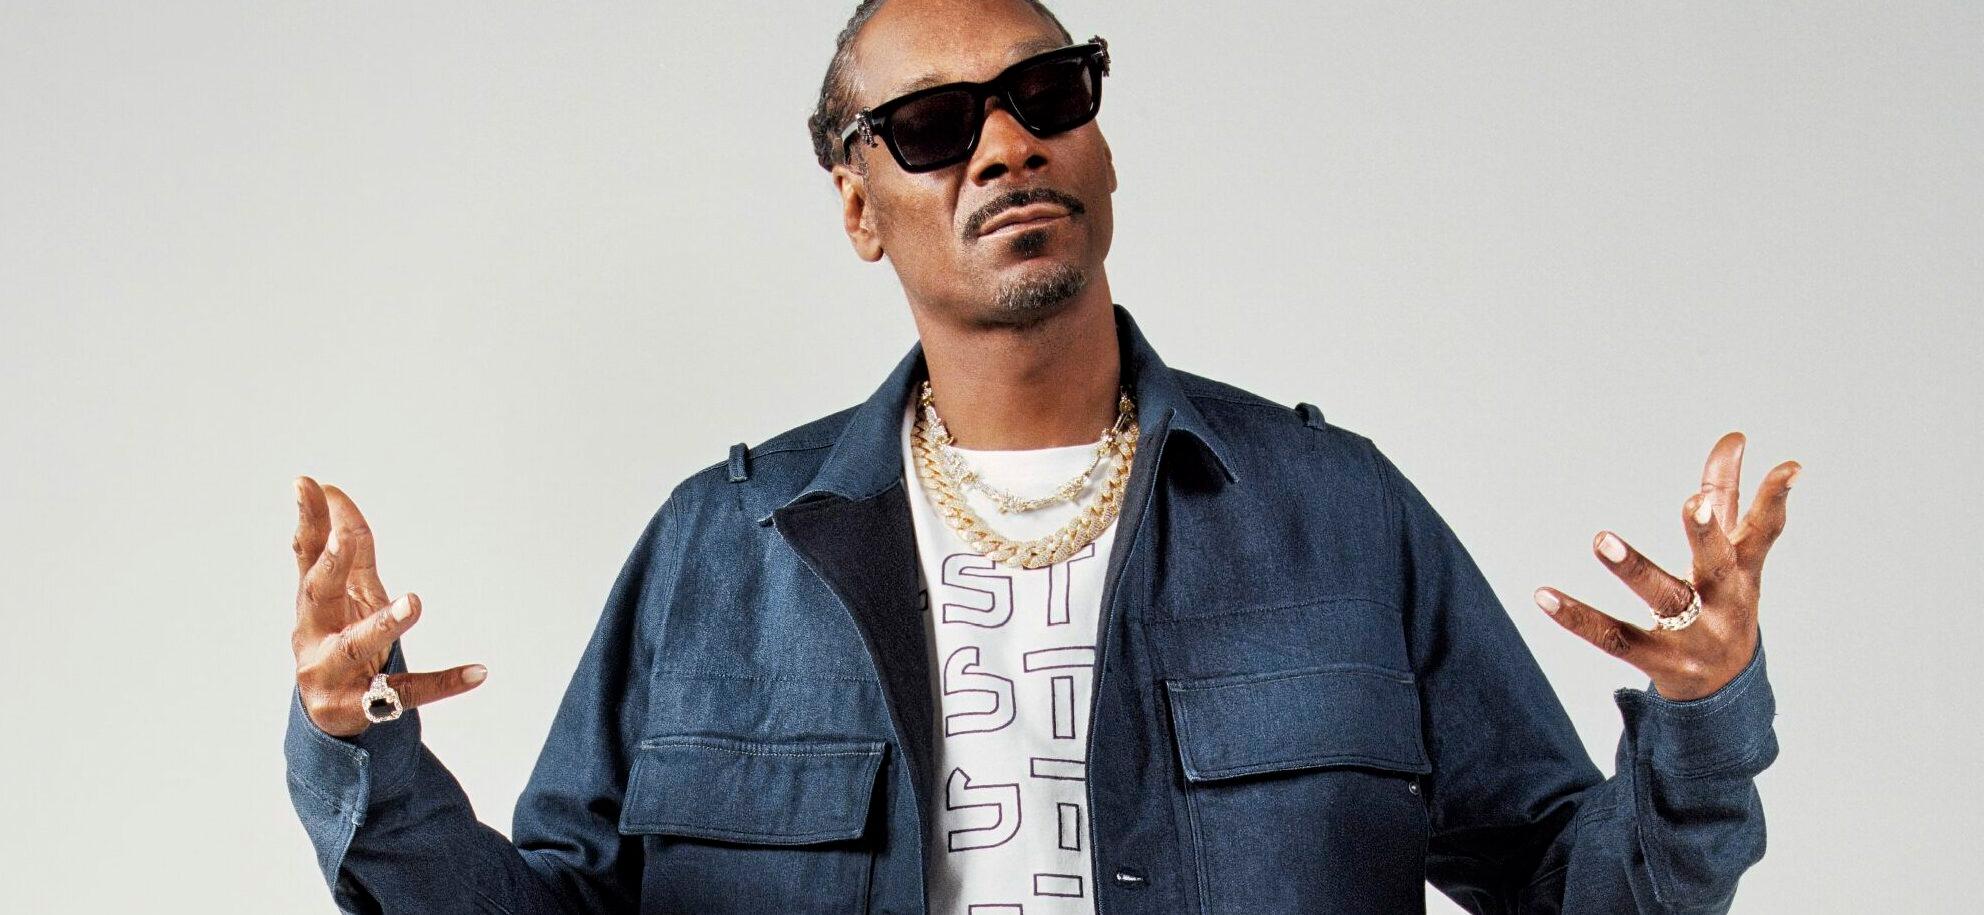 Snoop Dogg To Become Playable Character In 'Call Of Duty' Video Game –